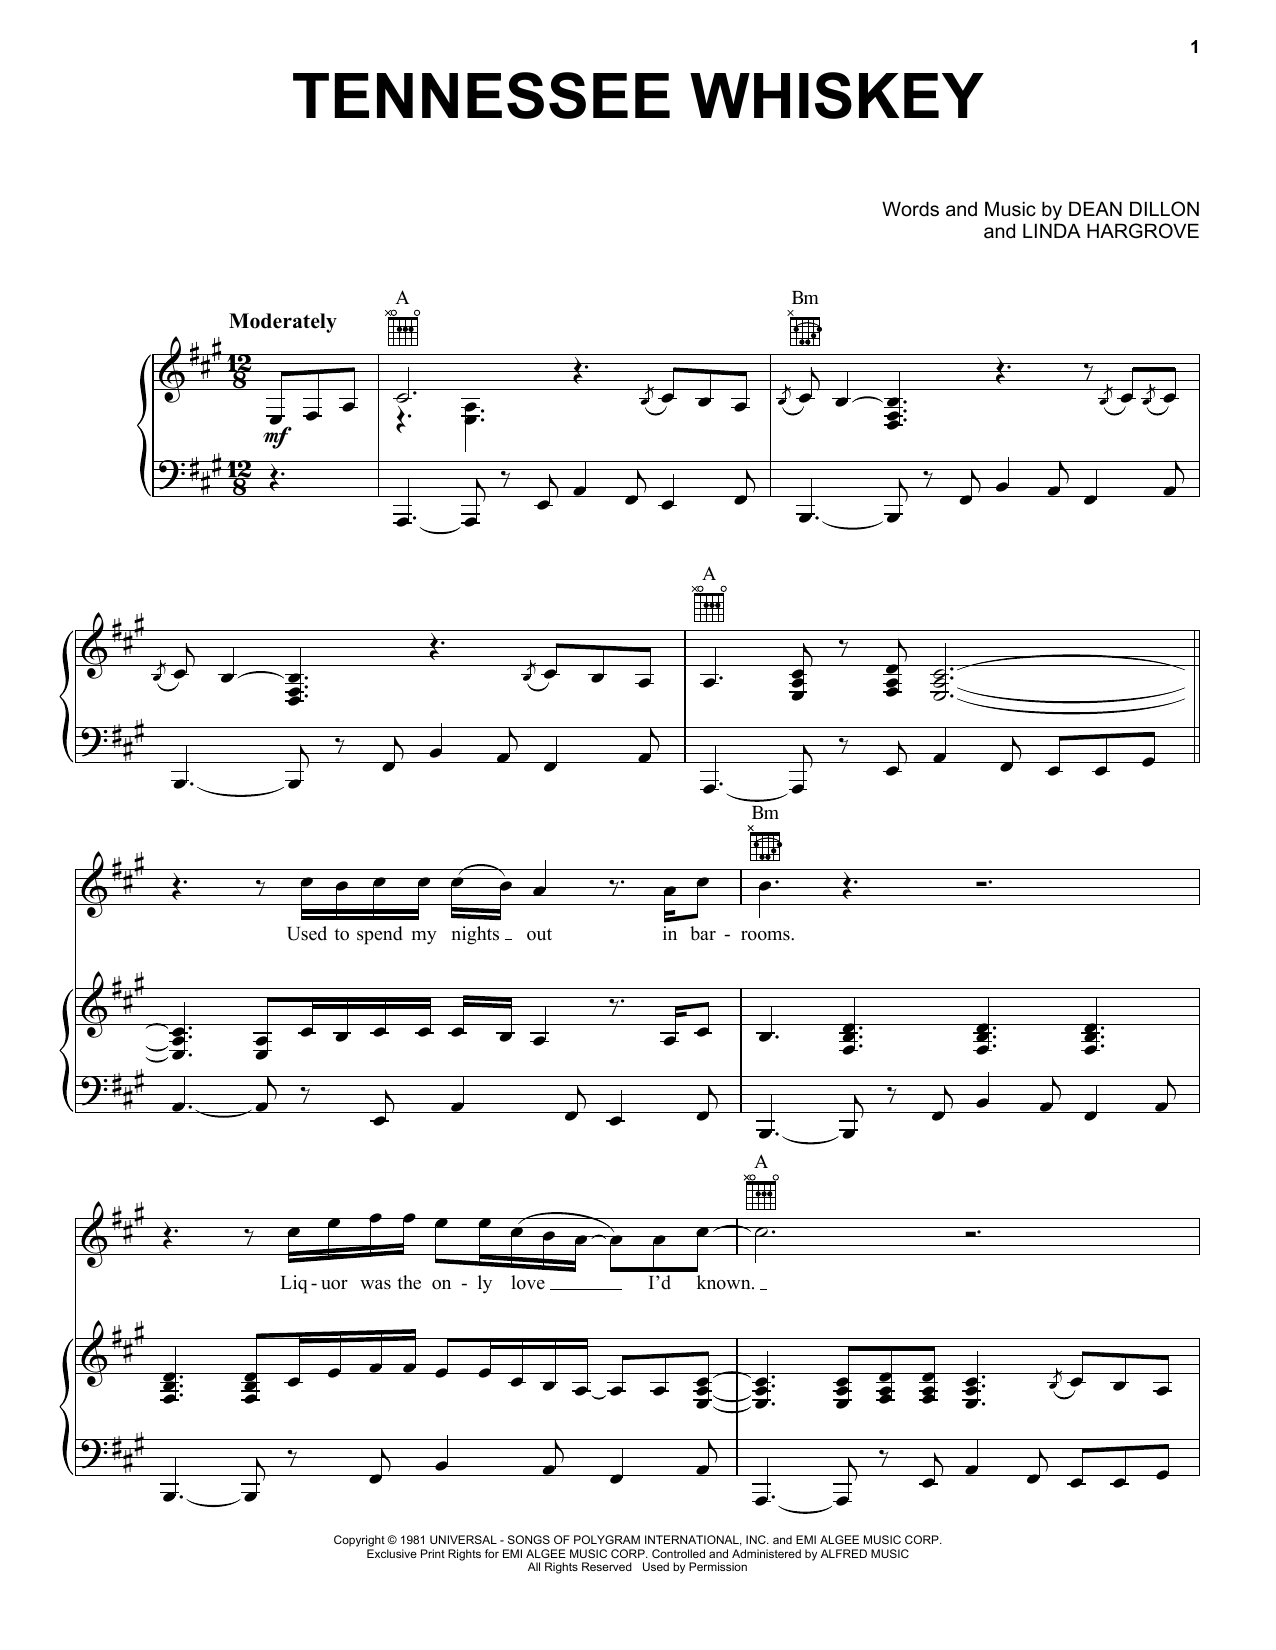 Download Chris Stapleton (Smooth As) Tennessee Whiskey Sheet Music